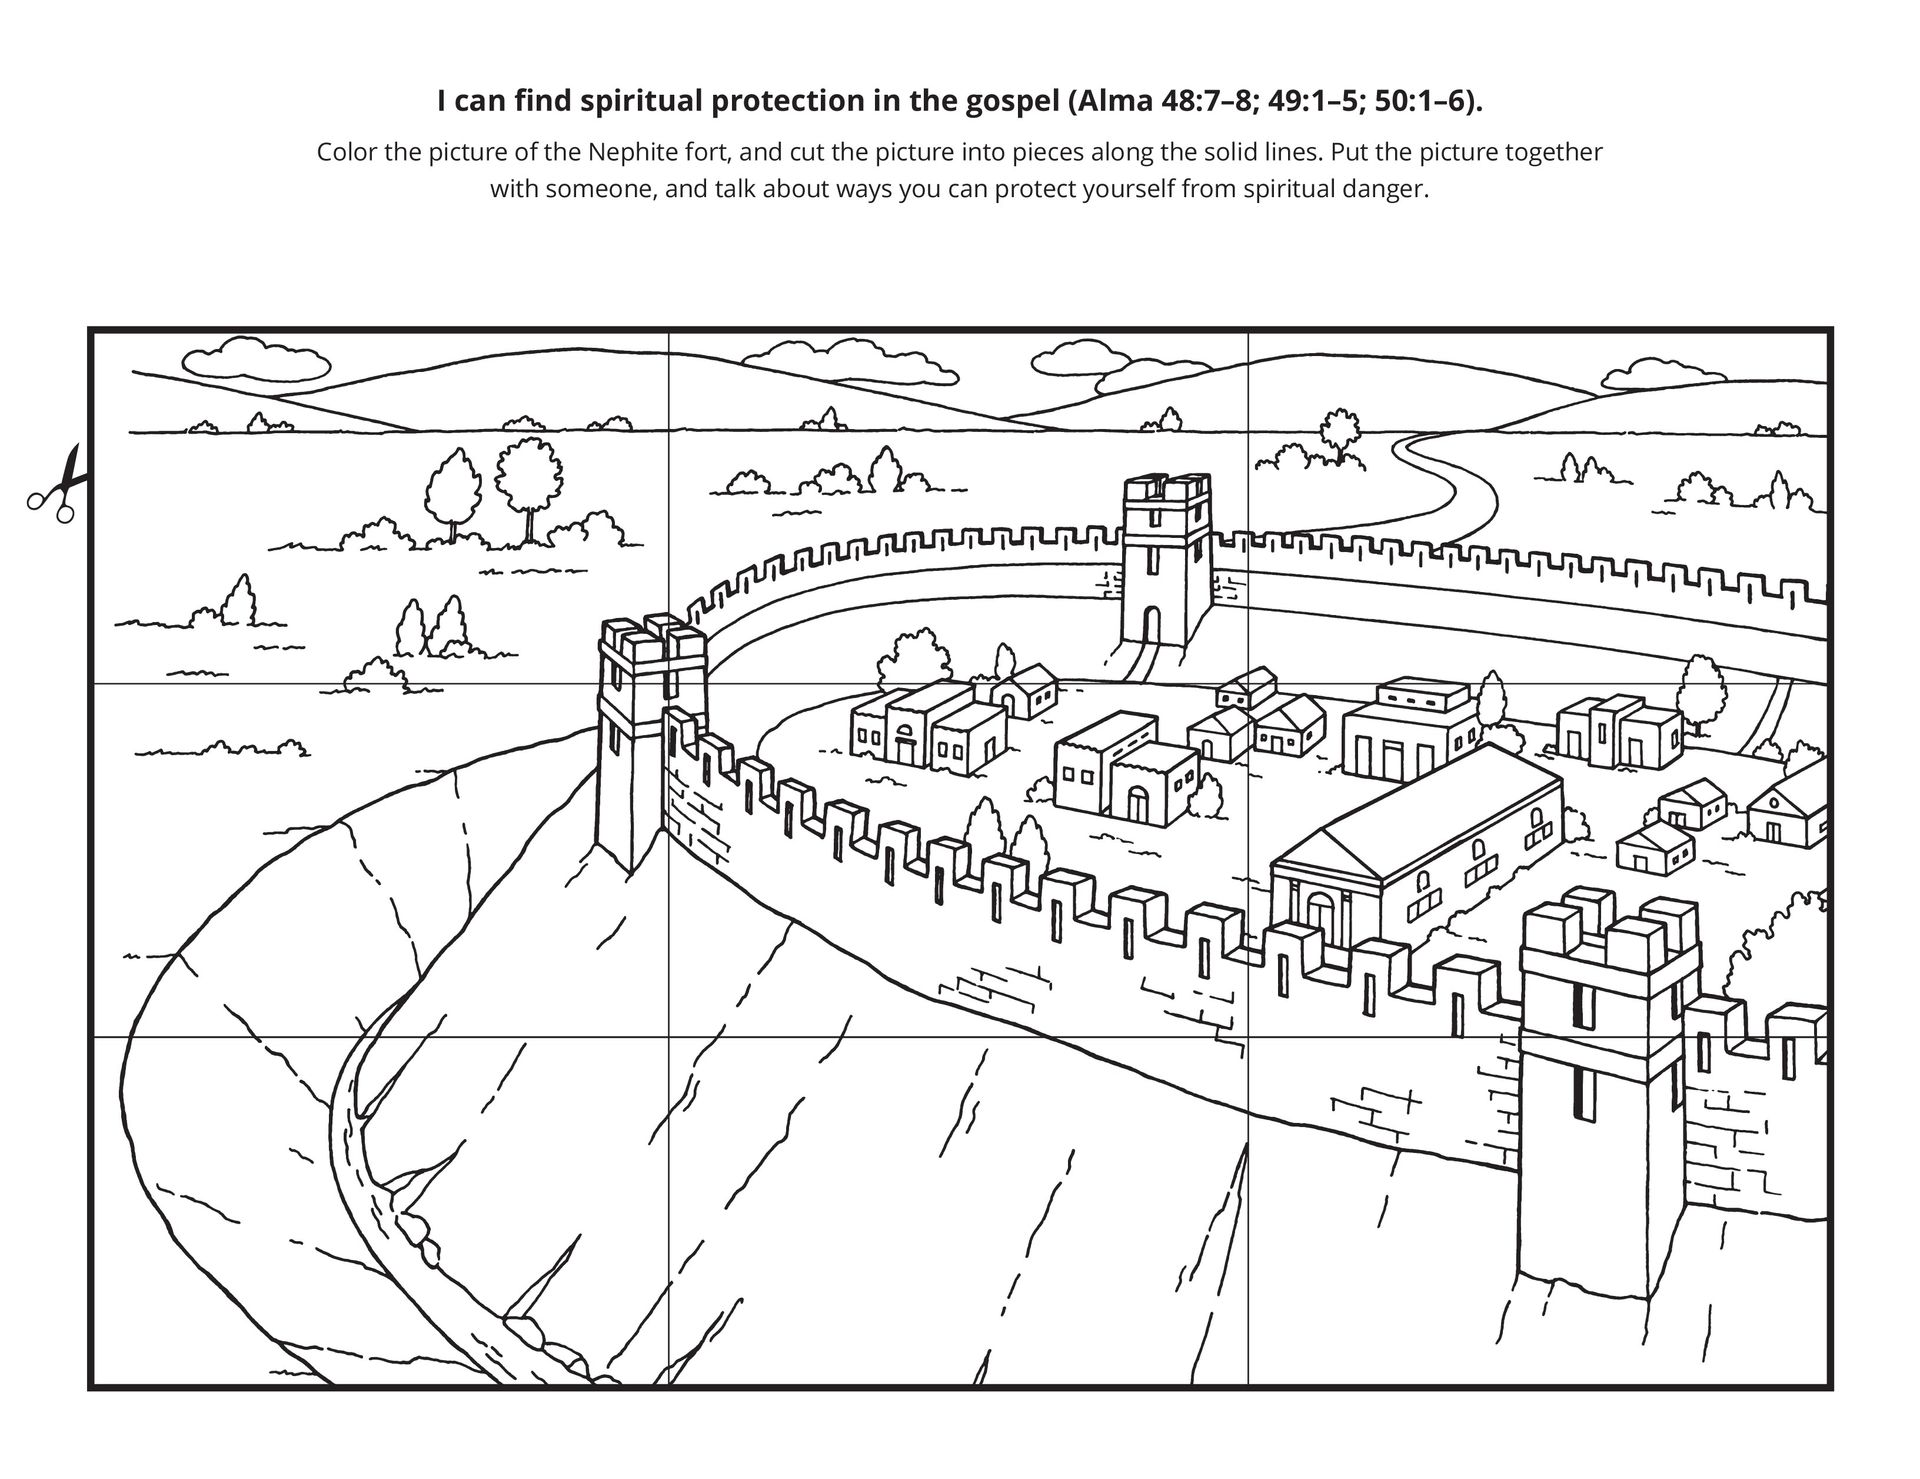 A line drawing of a walled Nephite city to be colored.